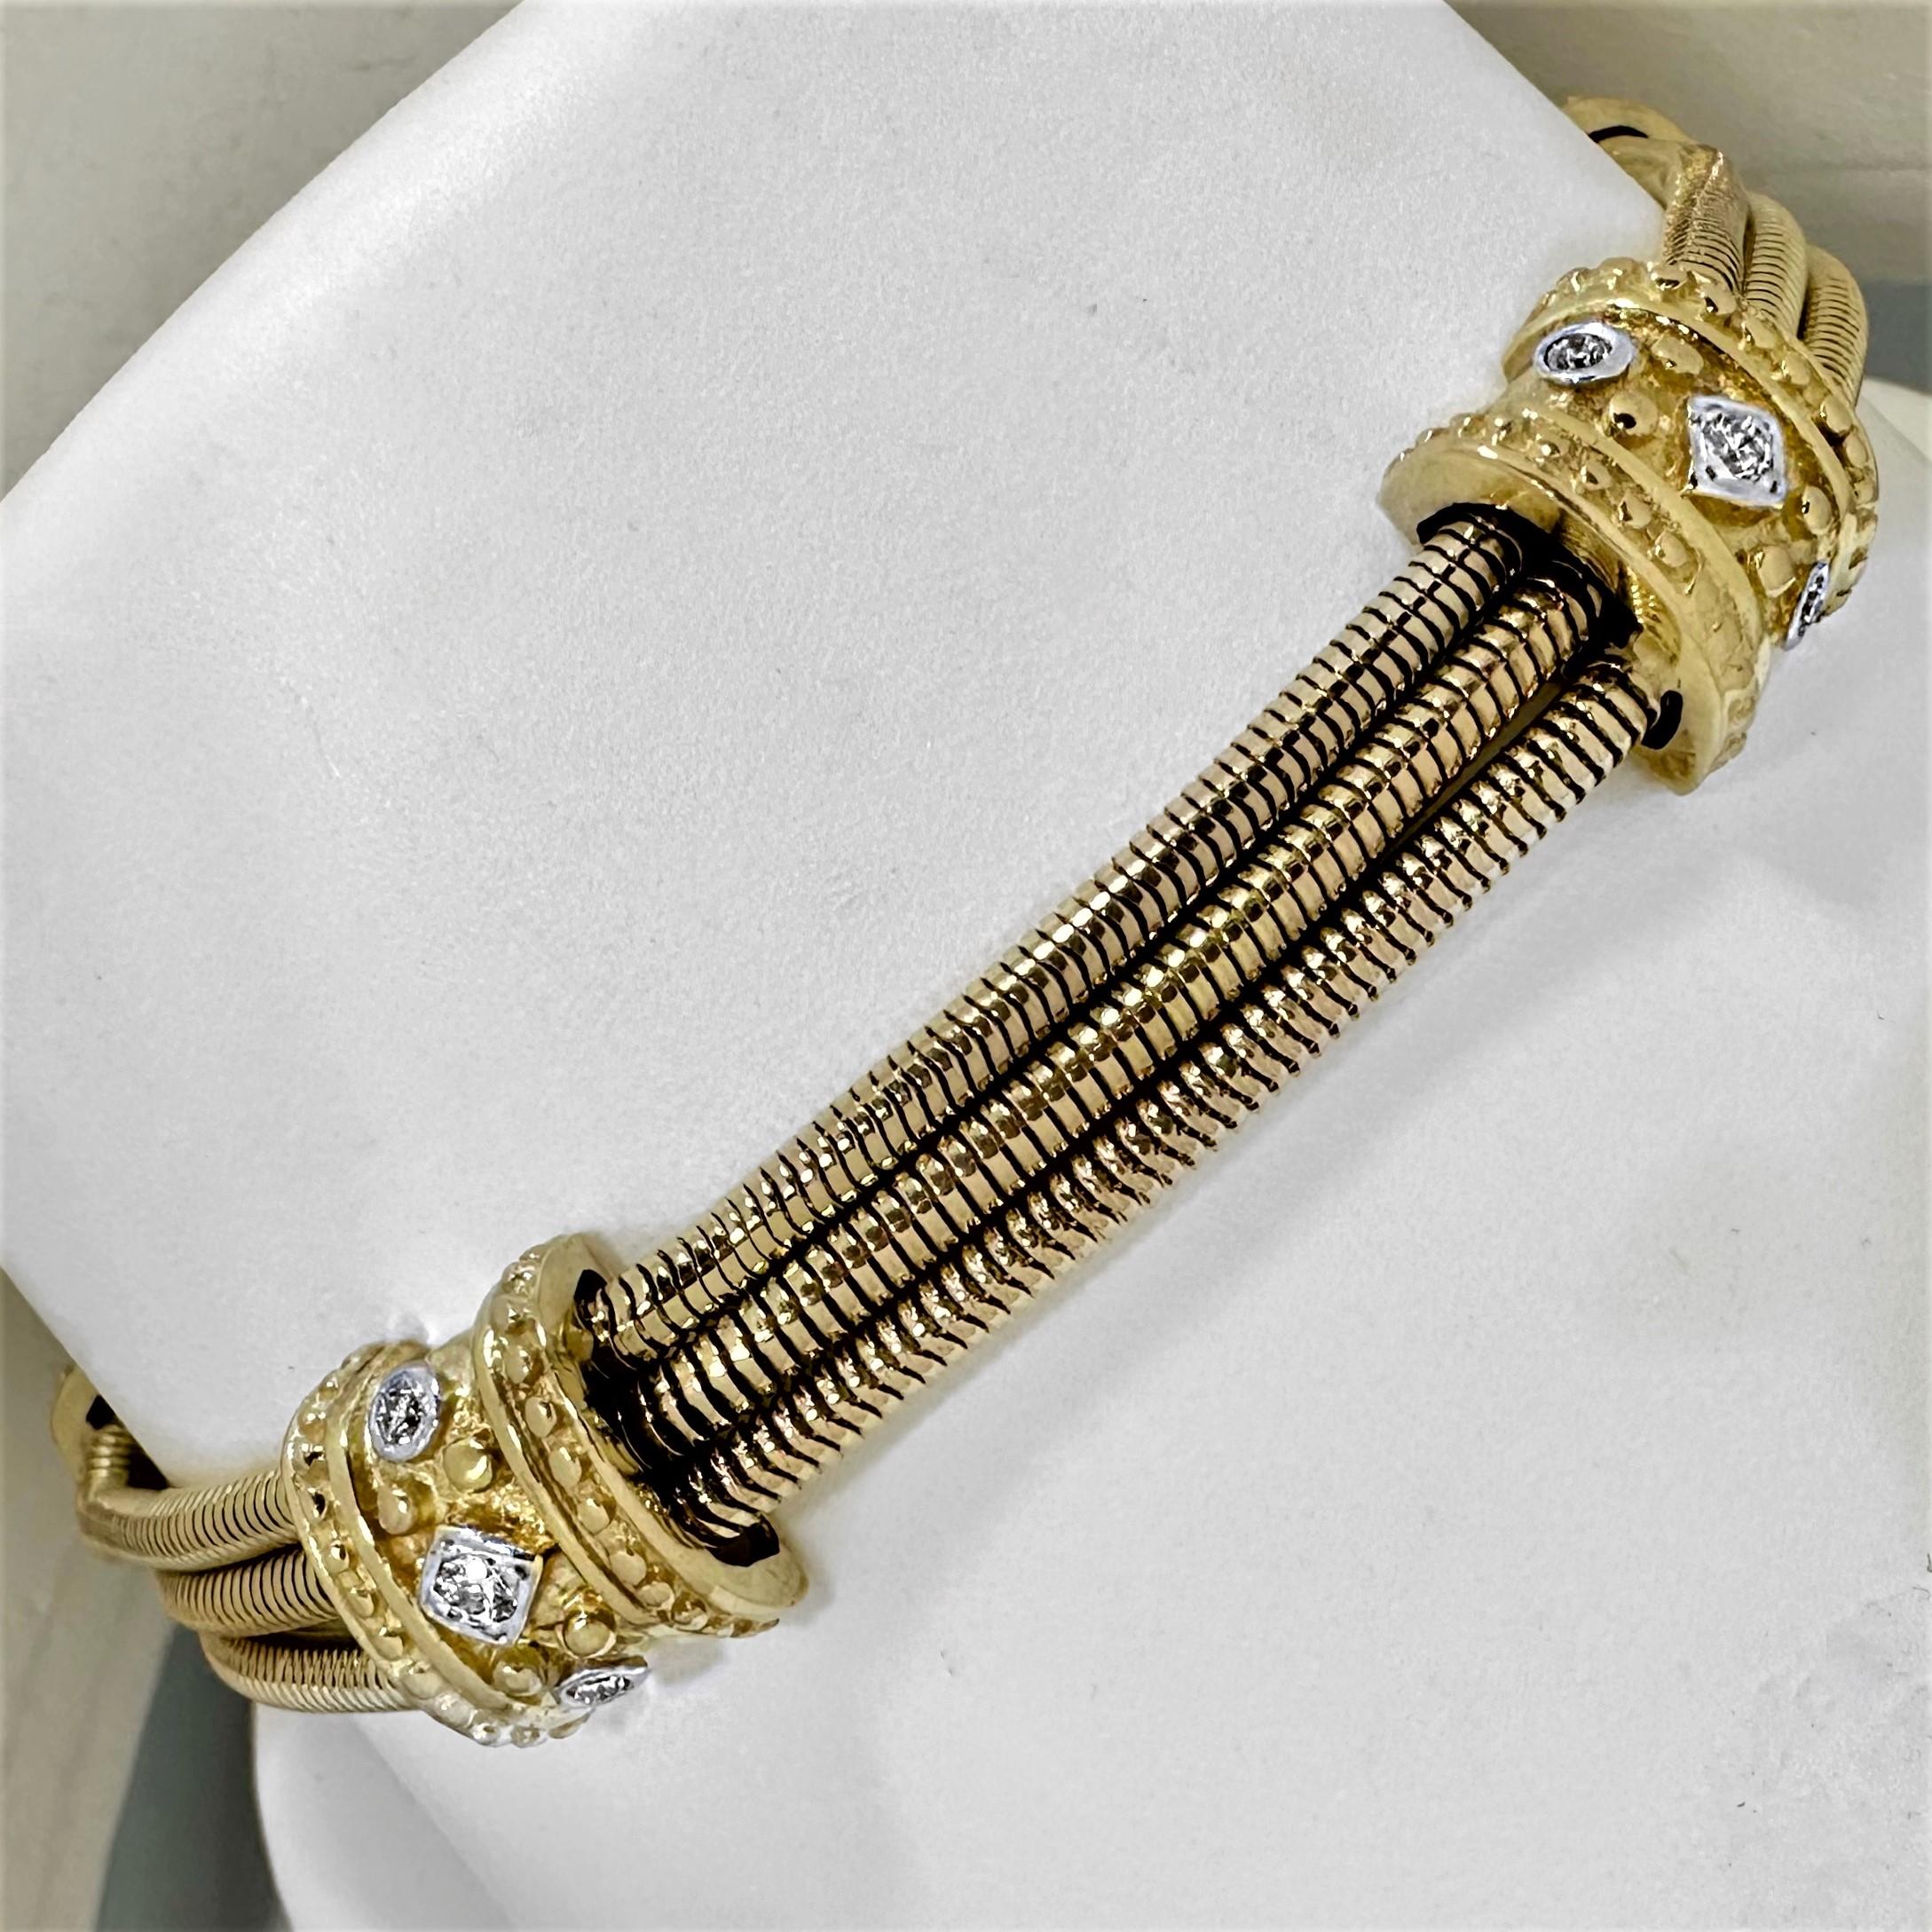 Brilliant Cut Classic Revival 14K Yellow Gold Round Snake Chain Bracelet with Diamonds